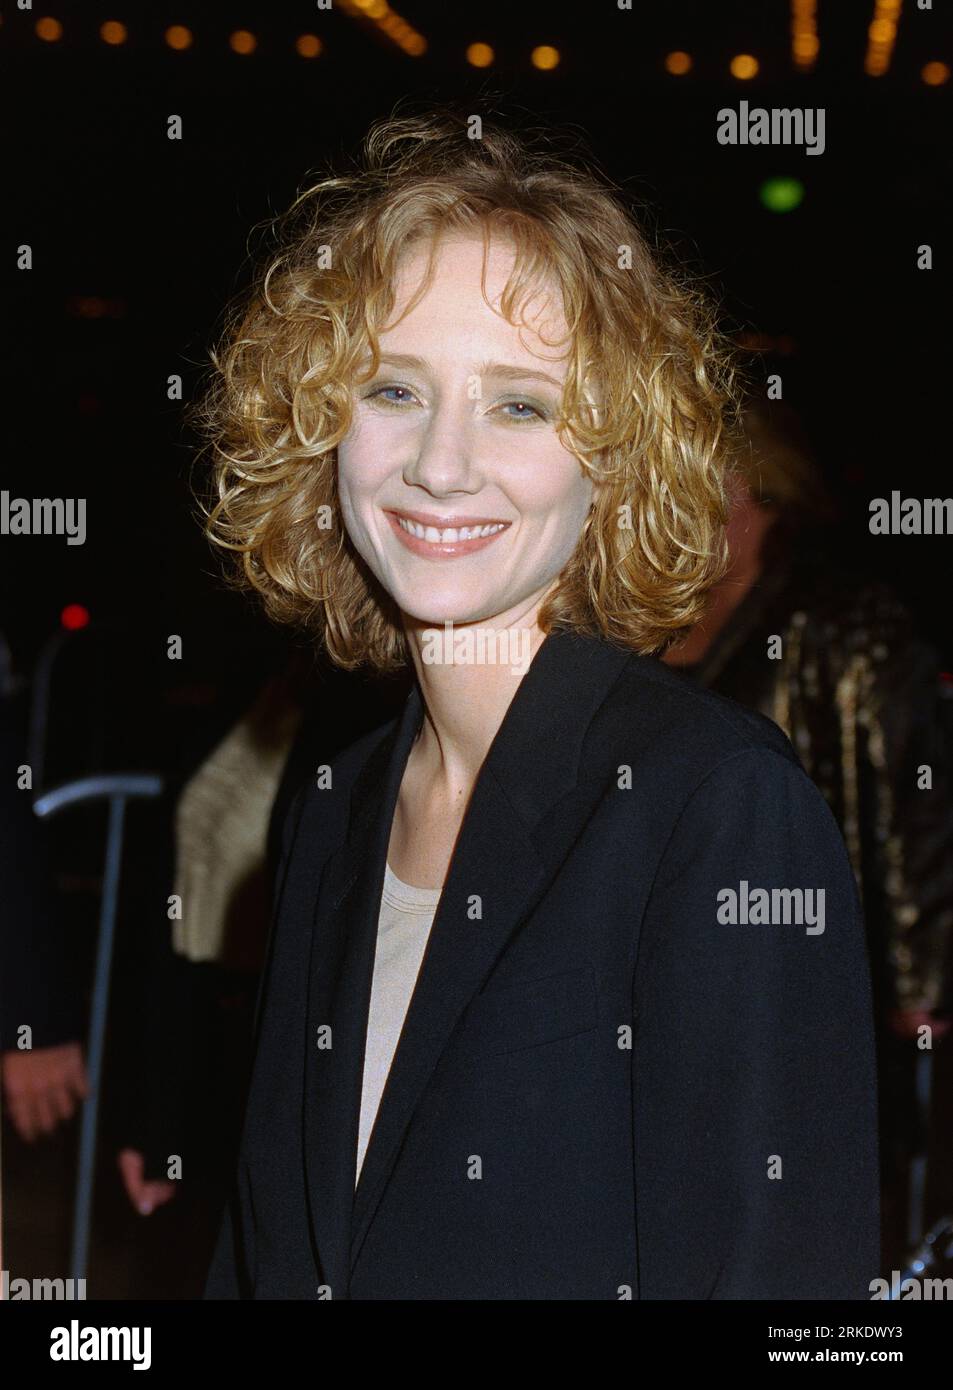 LOS ANGELES, CA. January 29, 1996: Actress Anne Heche at the premiere of ÒThe JurorÓ at the Cineplex Odeon Cinema, Century City Picture: Paul Smith / Featureflash Stock Photo